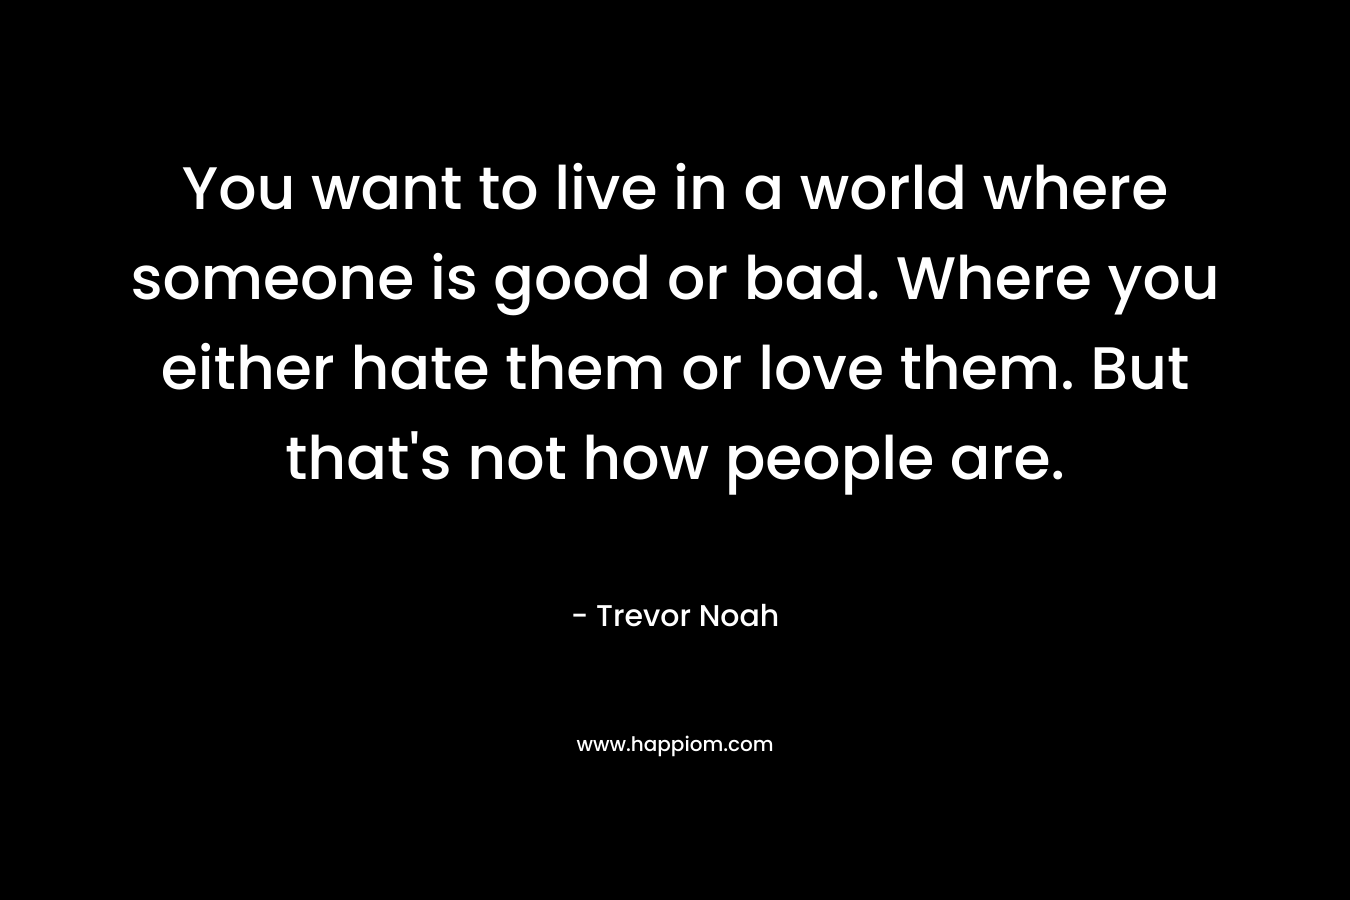 You want to live in a world where someone is good or bad. Where you either hate them or love them. But that’s not how people are. – Trevor Noah